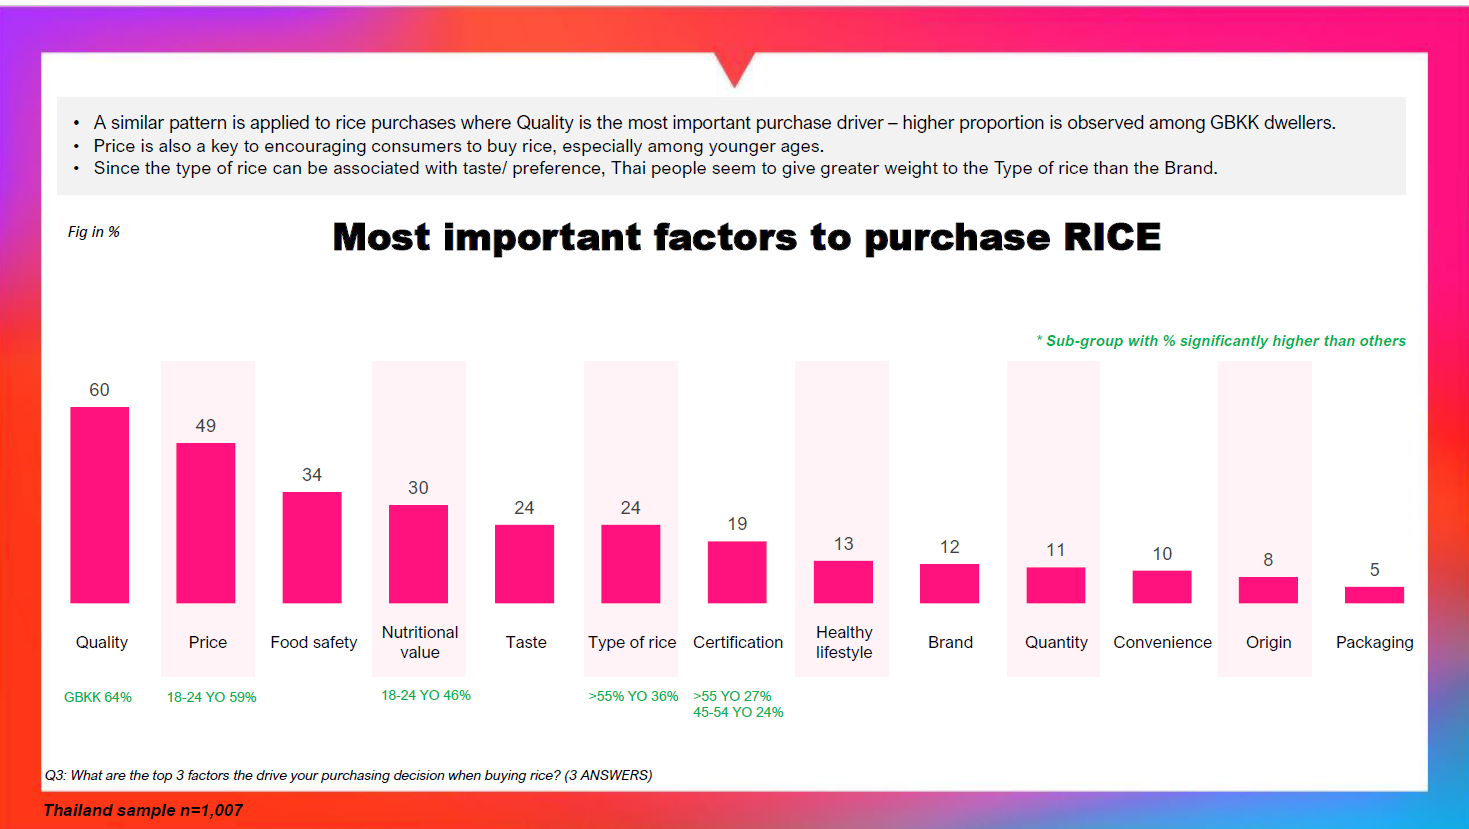 Almost half of Thai consumers (46%) indicated that they have purchased sustainable rice previously. Of this group, nearly all respondents (97%) expressed a willingness to pay a higher price for rice that has their priority sustainability attributes.